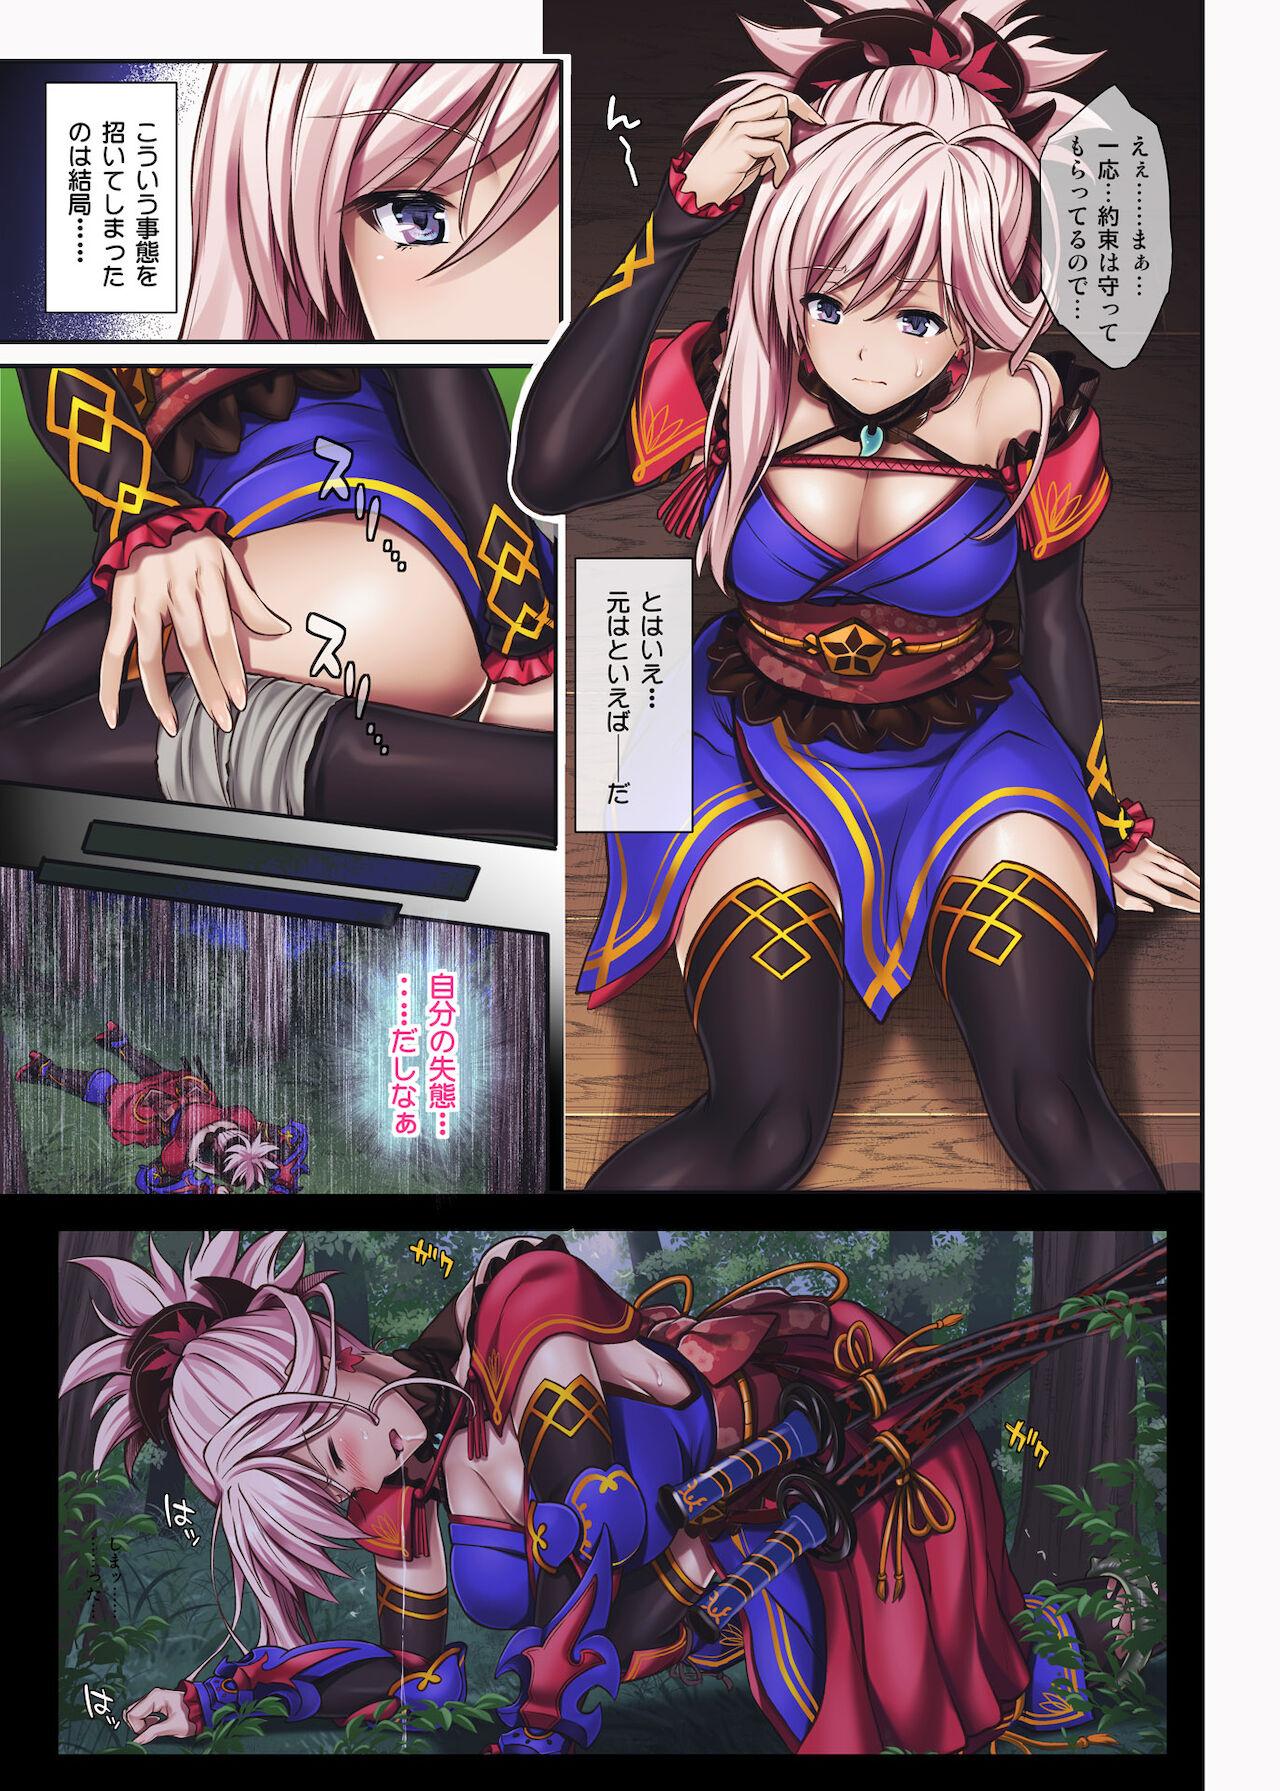 Porn Amateur Cyclone no Doujinshi Full Color Pack 4 - Fate grand order Matures - Page 6